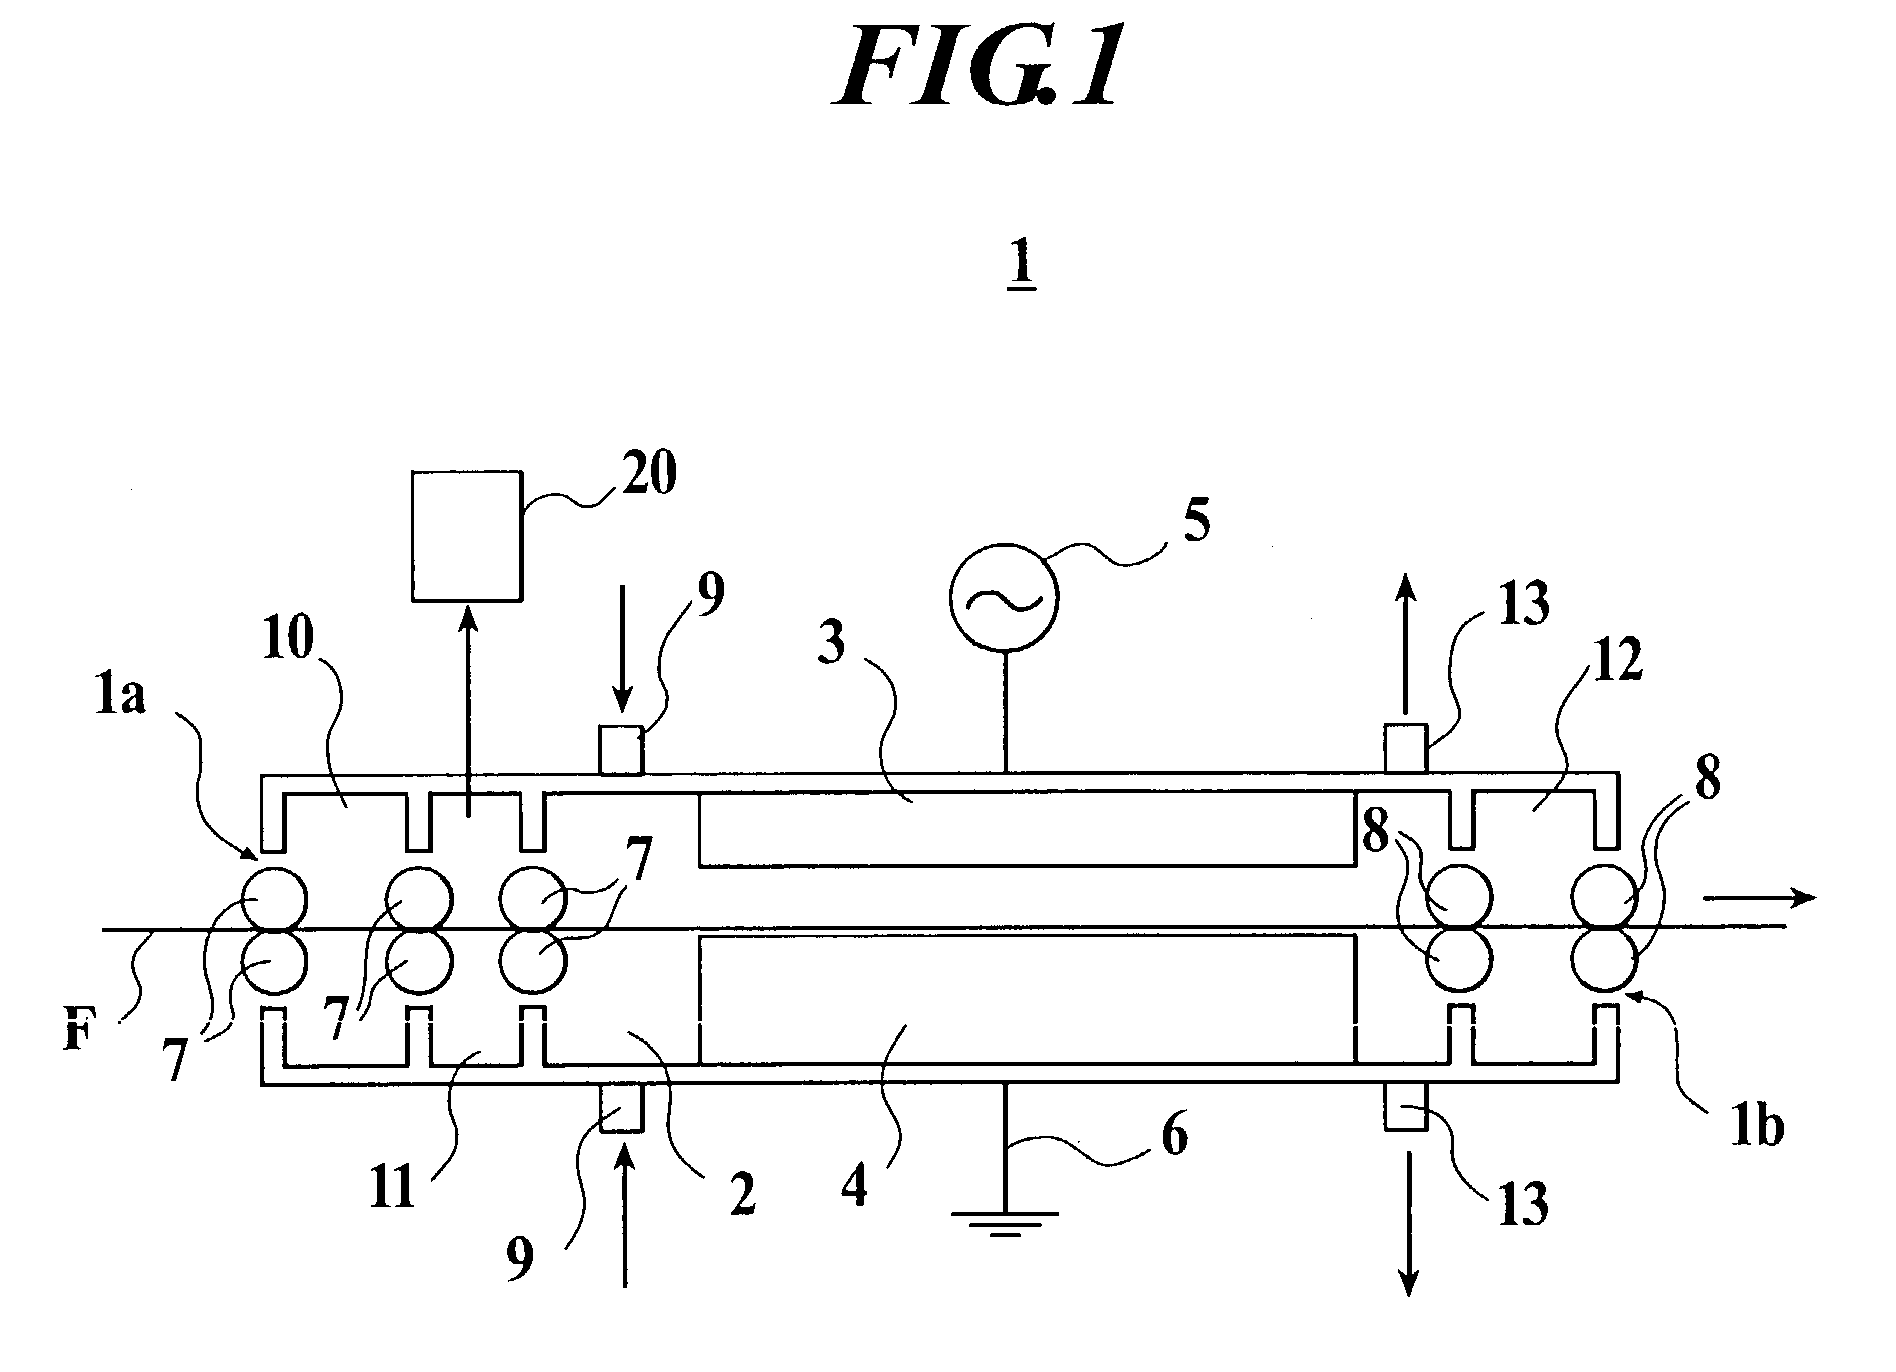 Film forming method employing reactive and reducing gases and substrate formed by the method